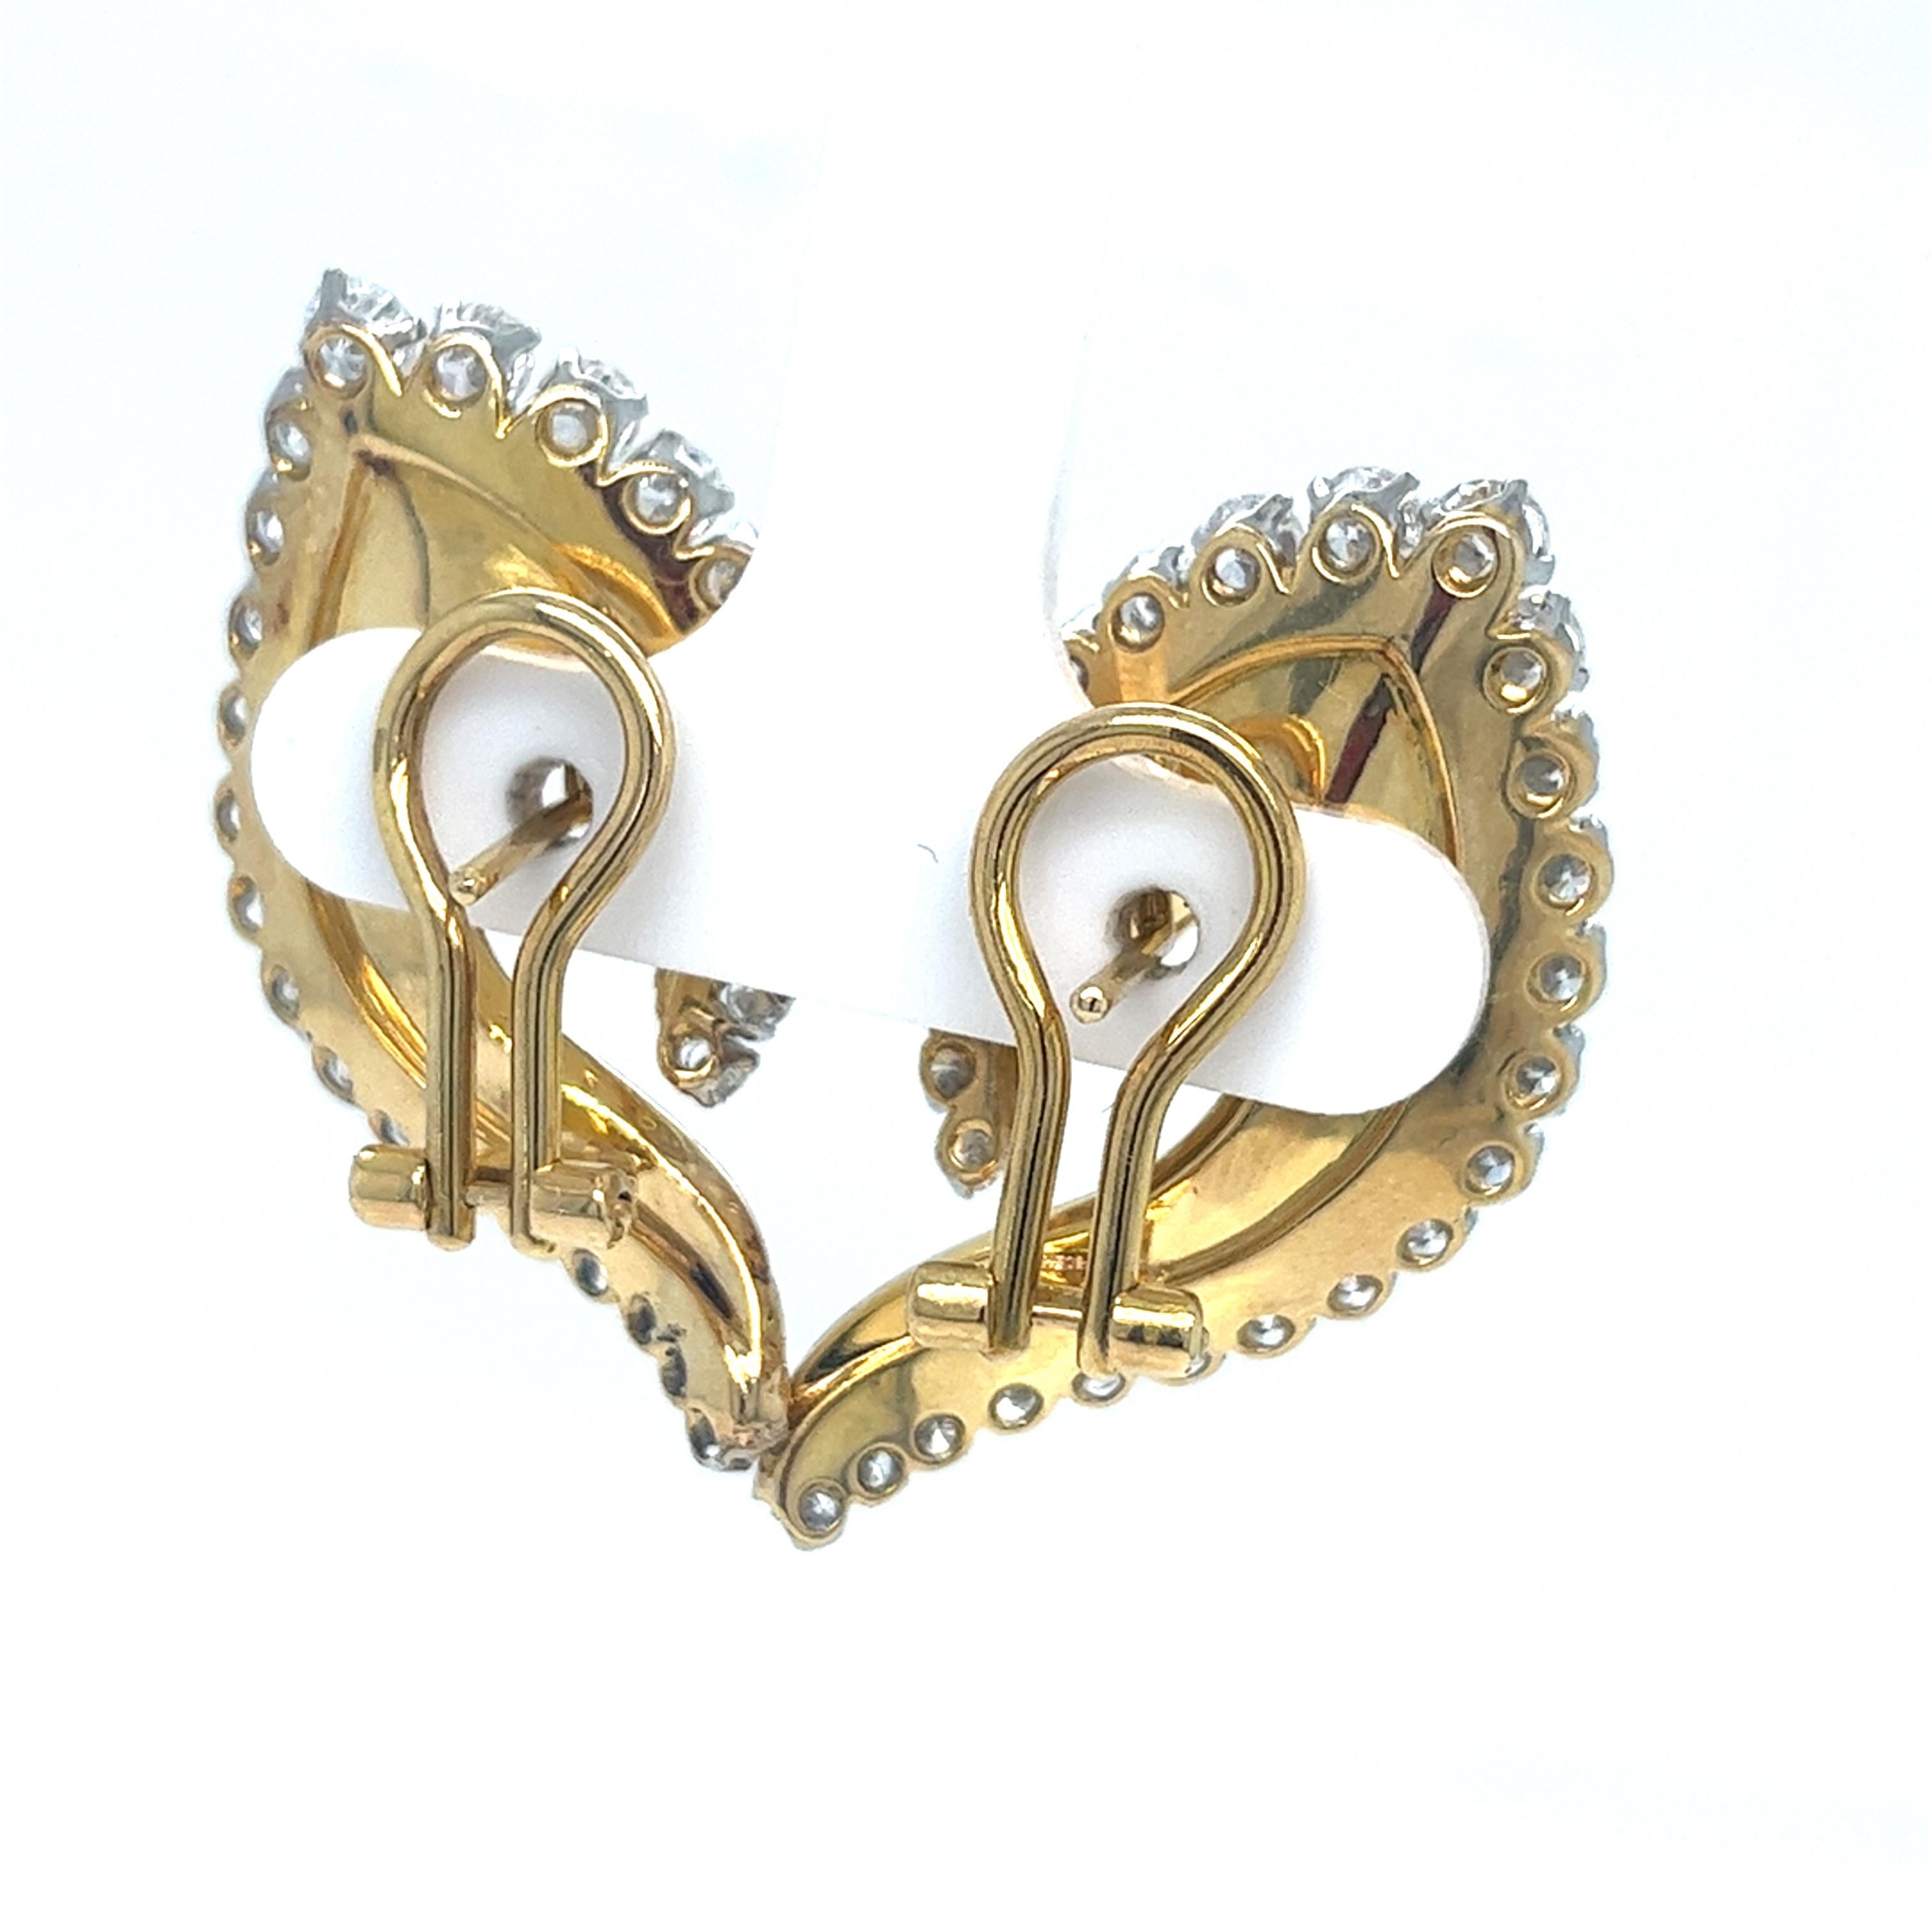 Leaf Design Earrings
 18kt Yellow Gold Wire
26 Natural Full Cut Diamonds 3.08 cts
Polish Excellent
Cut Excellent
Color G
Clarity VVS2
Total Weight 16.30 Grams